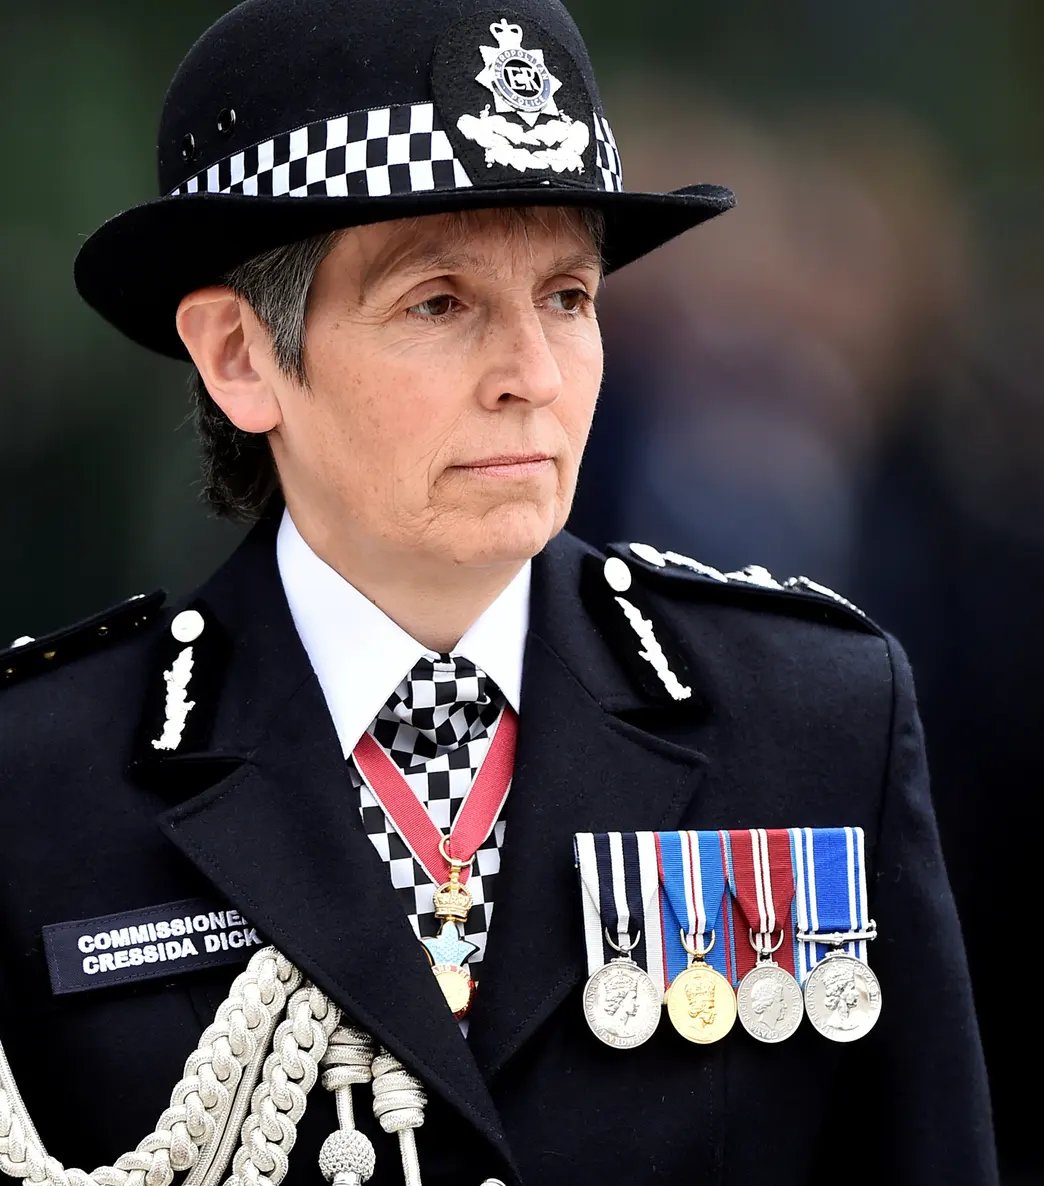 Widely panned as impractical, the women's truncheon of 1986 (1) was soon dropped, but otherwise evolution has continued, with new designs for senior officers' full-dress uniform (2). Hat excepted, women's uniforms are now largely indistinguishable ...  #LFW  #LFW2021 (11/n)